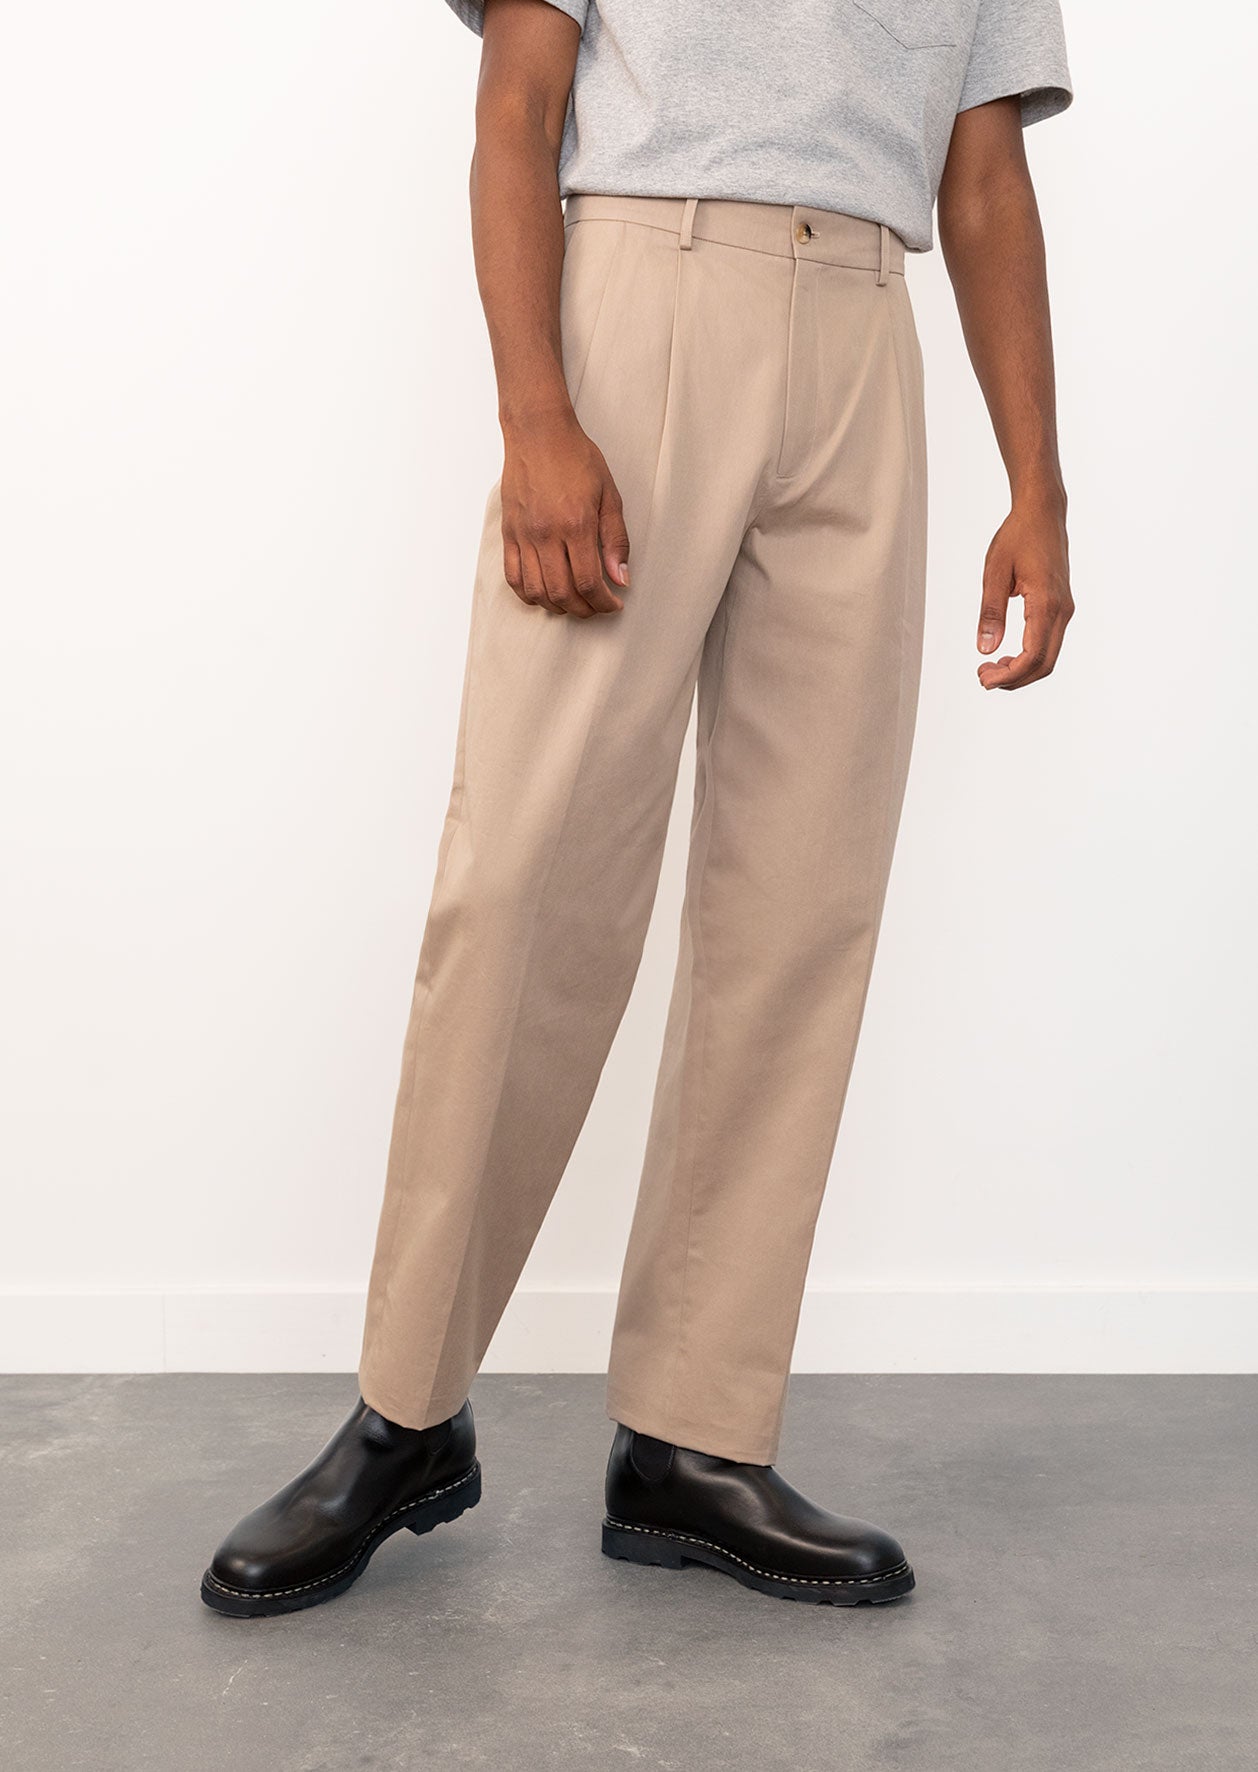 Mens wedding pants that are slim cut and top in trends | Baron Boutique